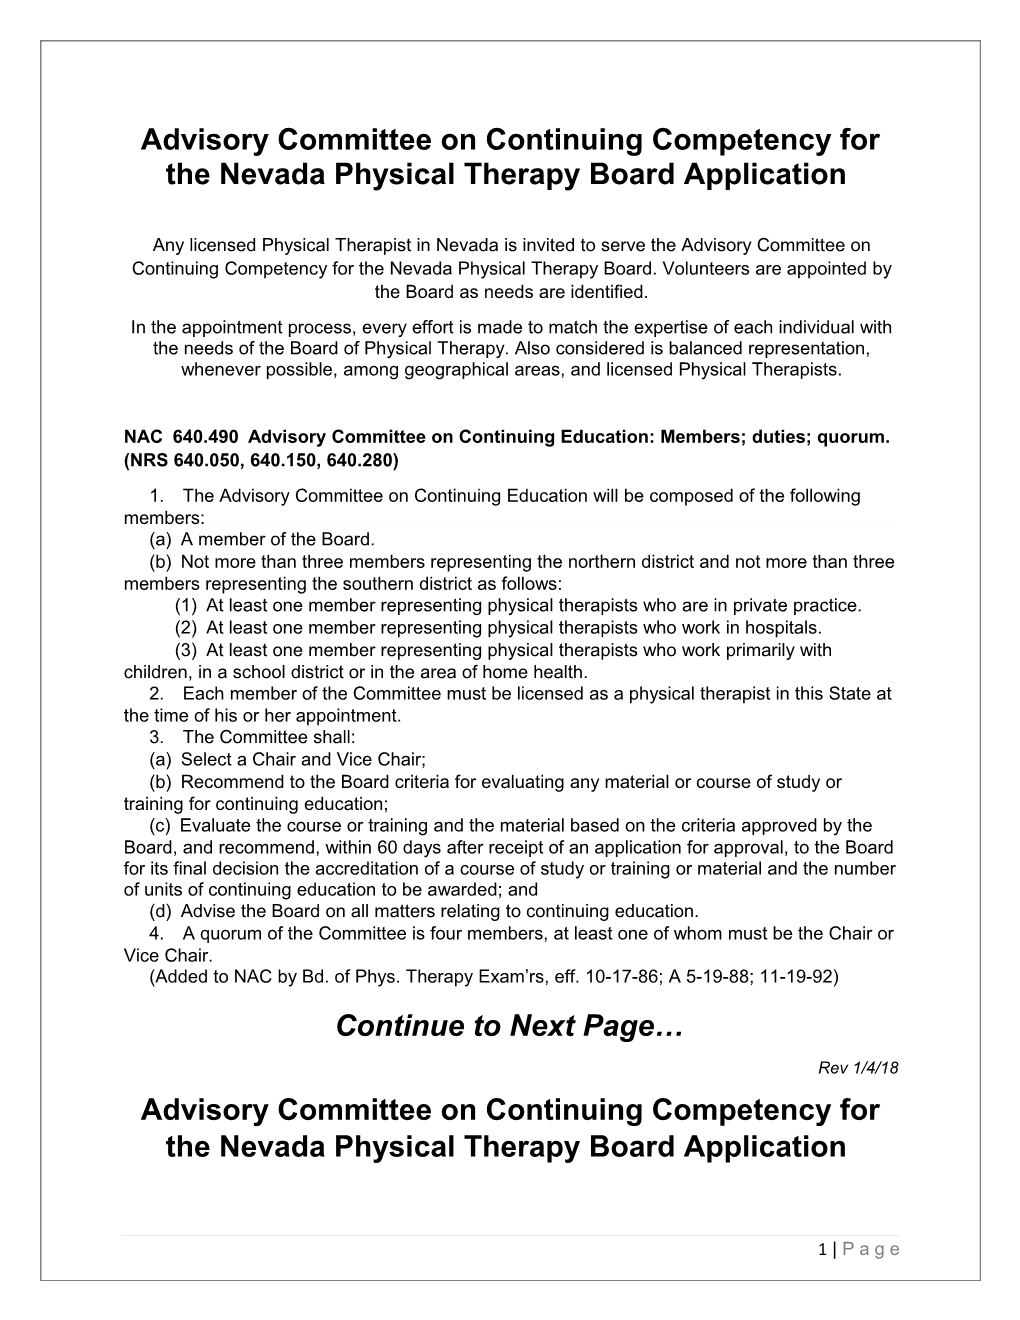 Advisory Committee on Continuing Competency for the Nevada Physical Therapy Board Application